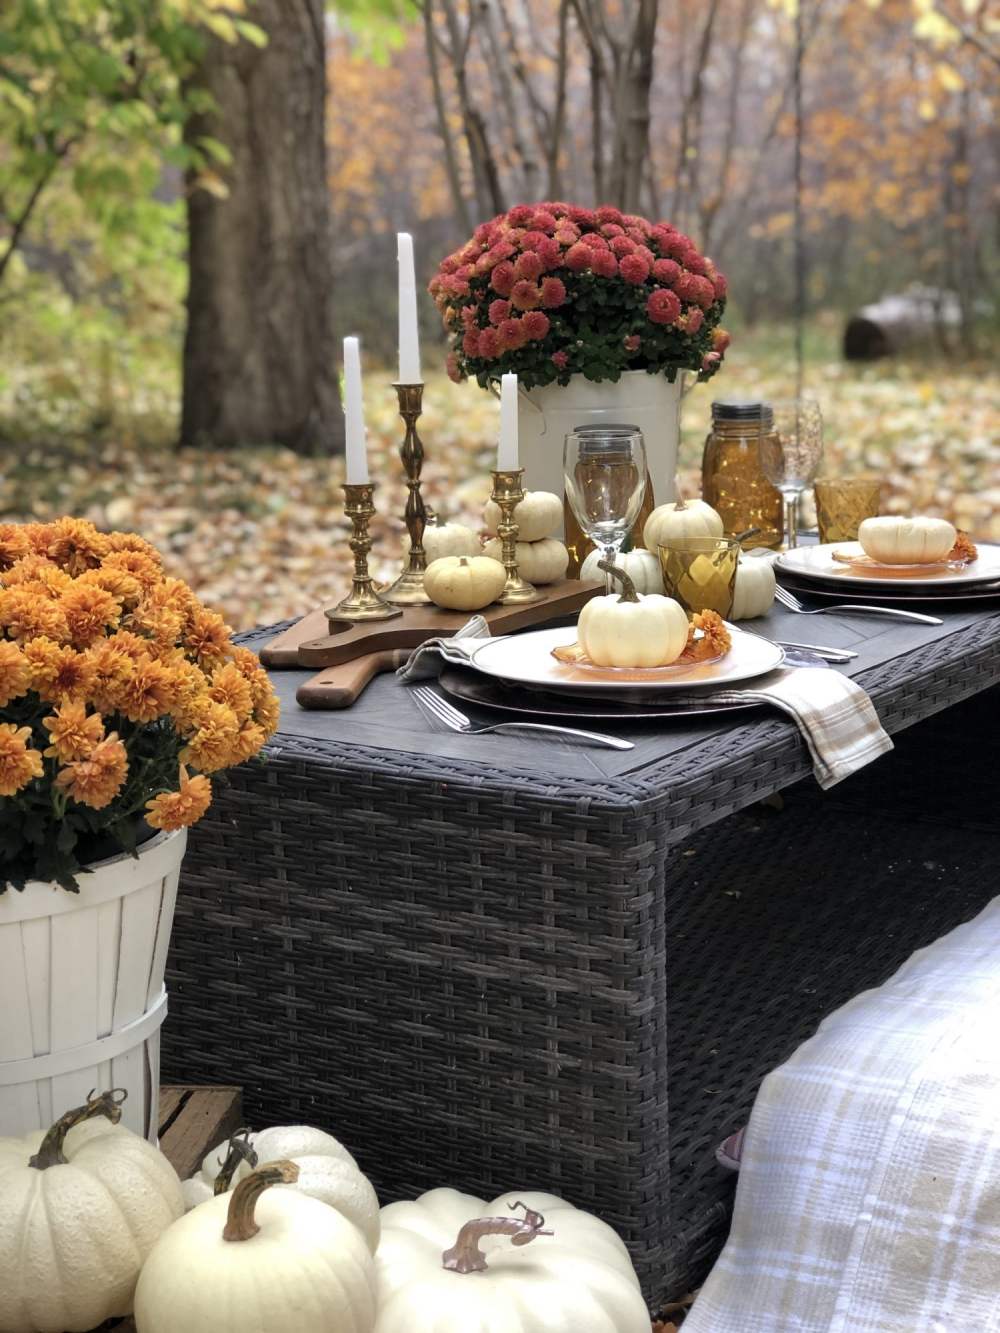 Thanksgiving table in the middle of nature